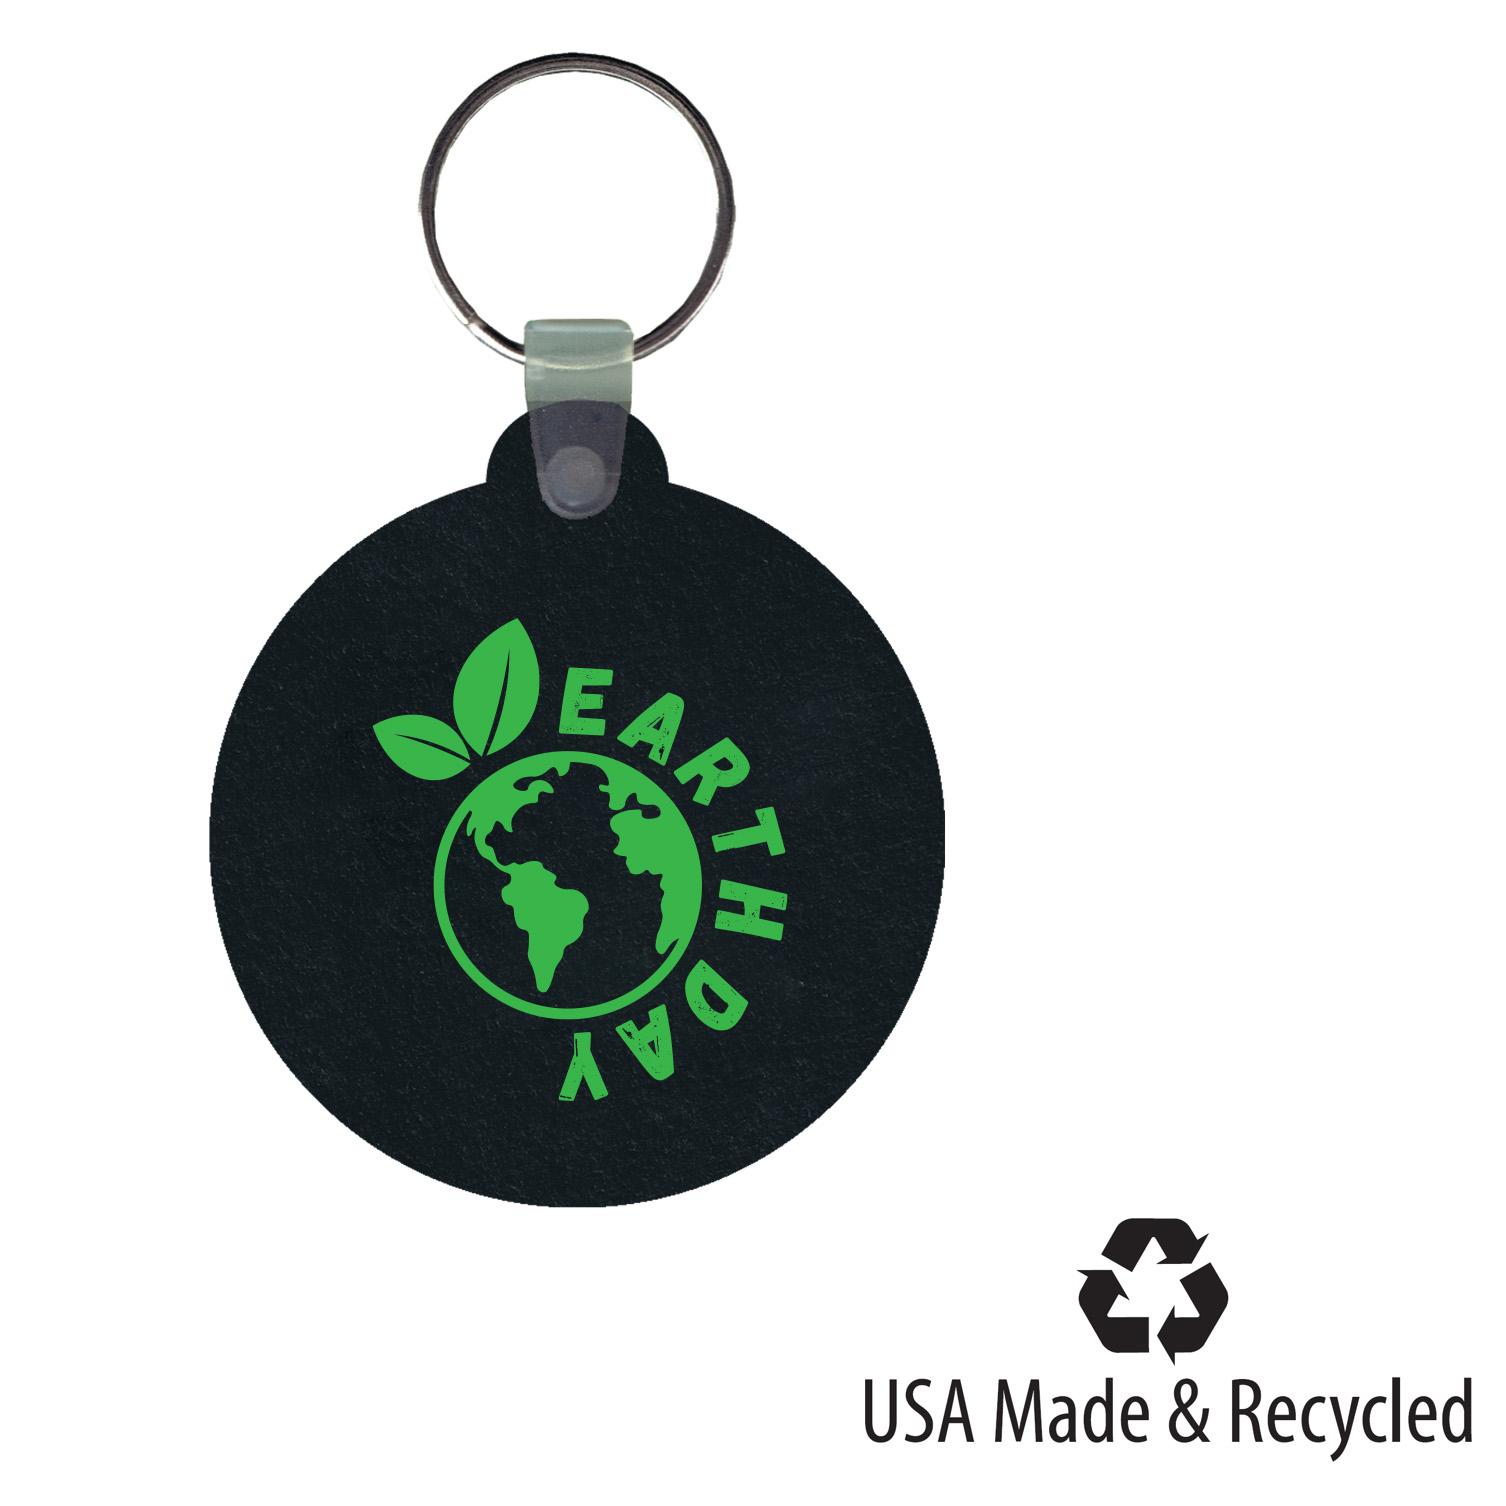 Earth Day Recycled Tire Circle Keychain USA Made